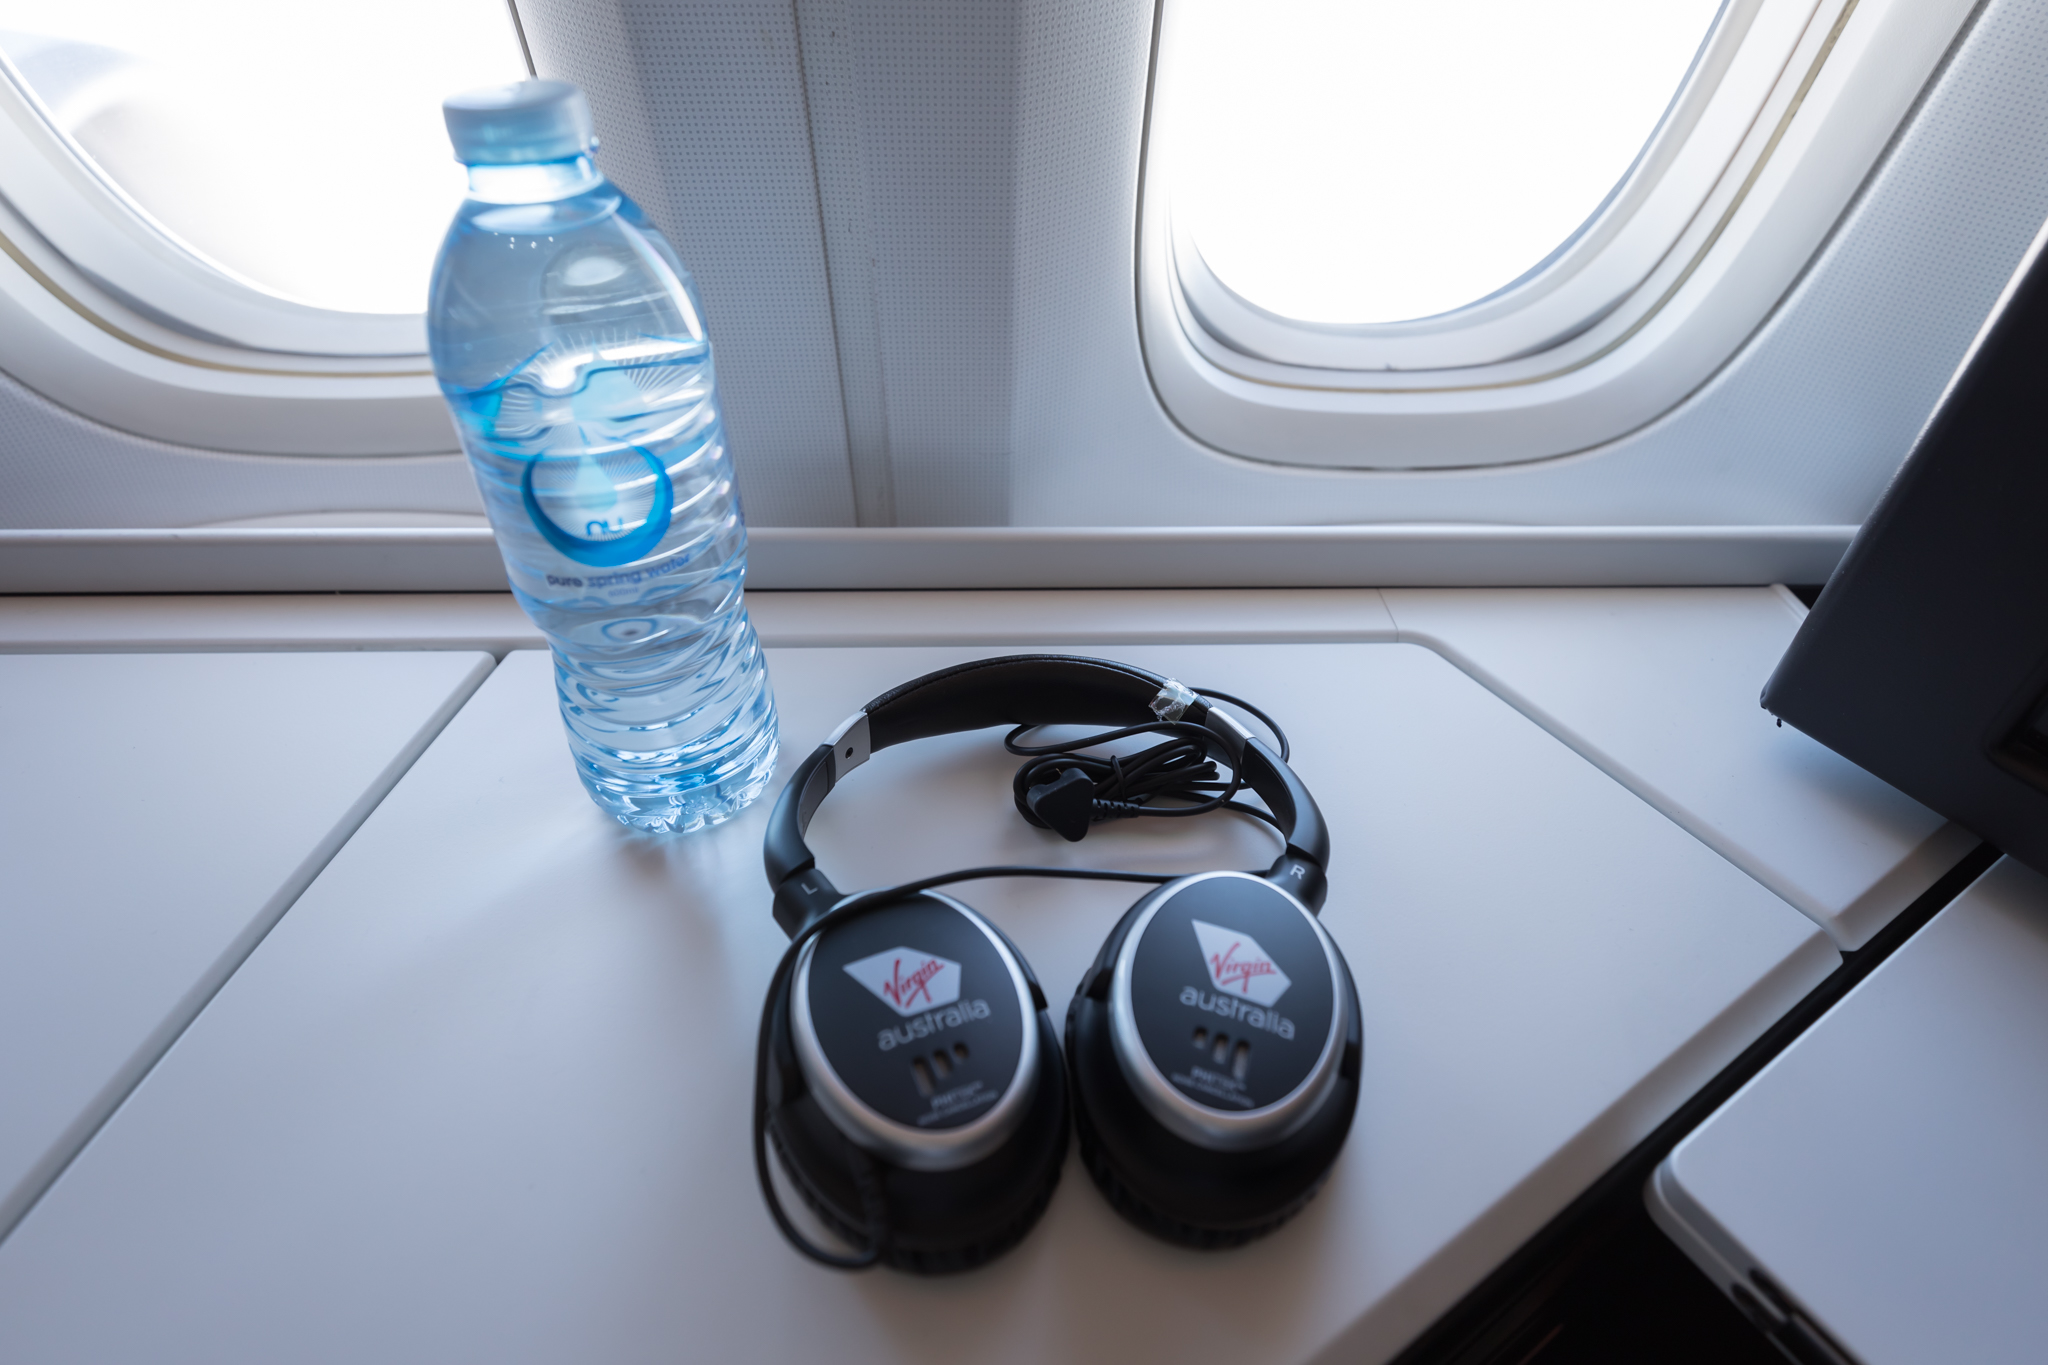 headphones and a bottle of water on a table